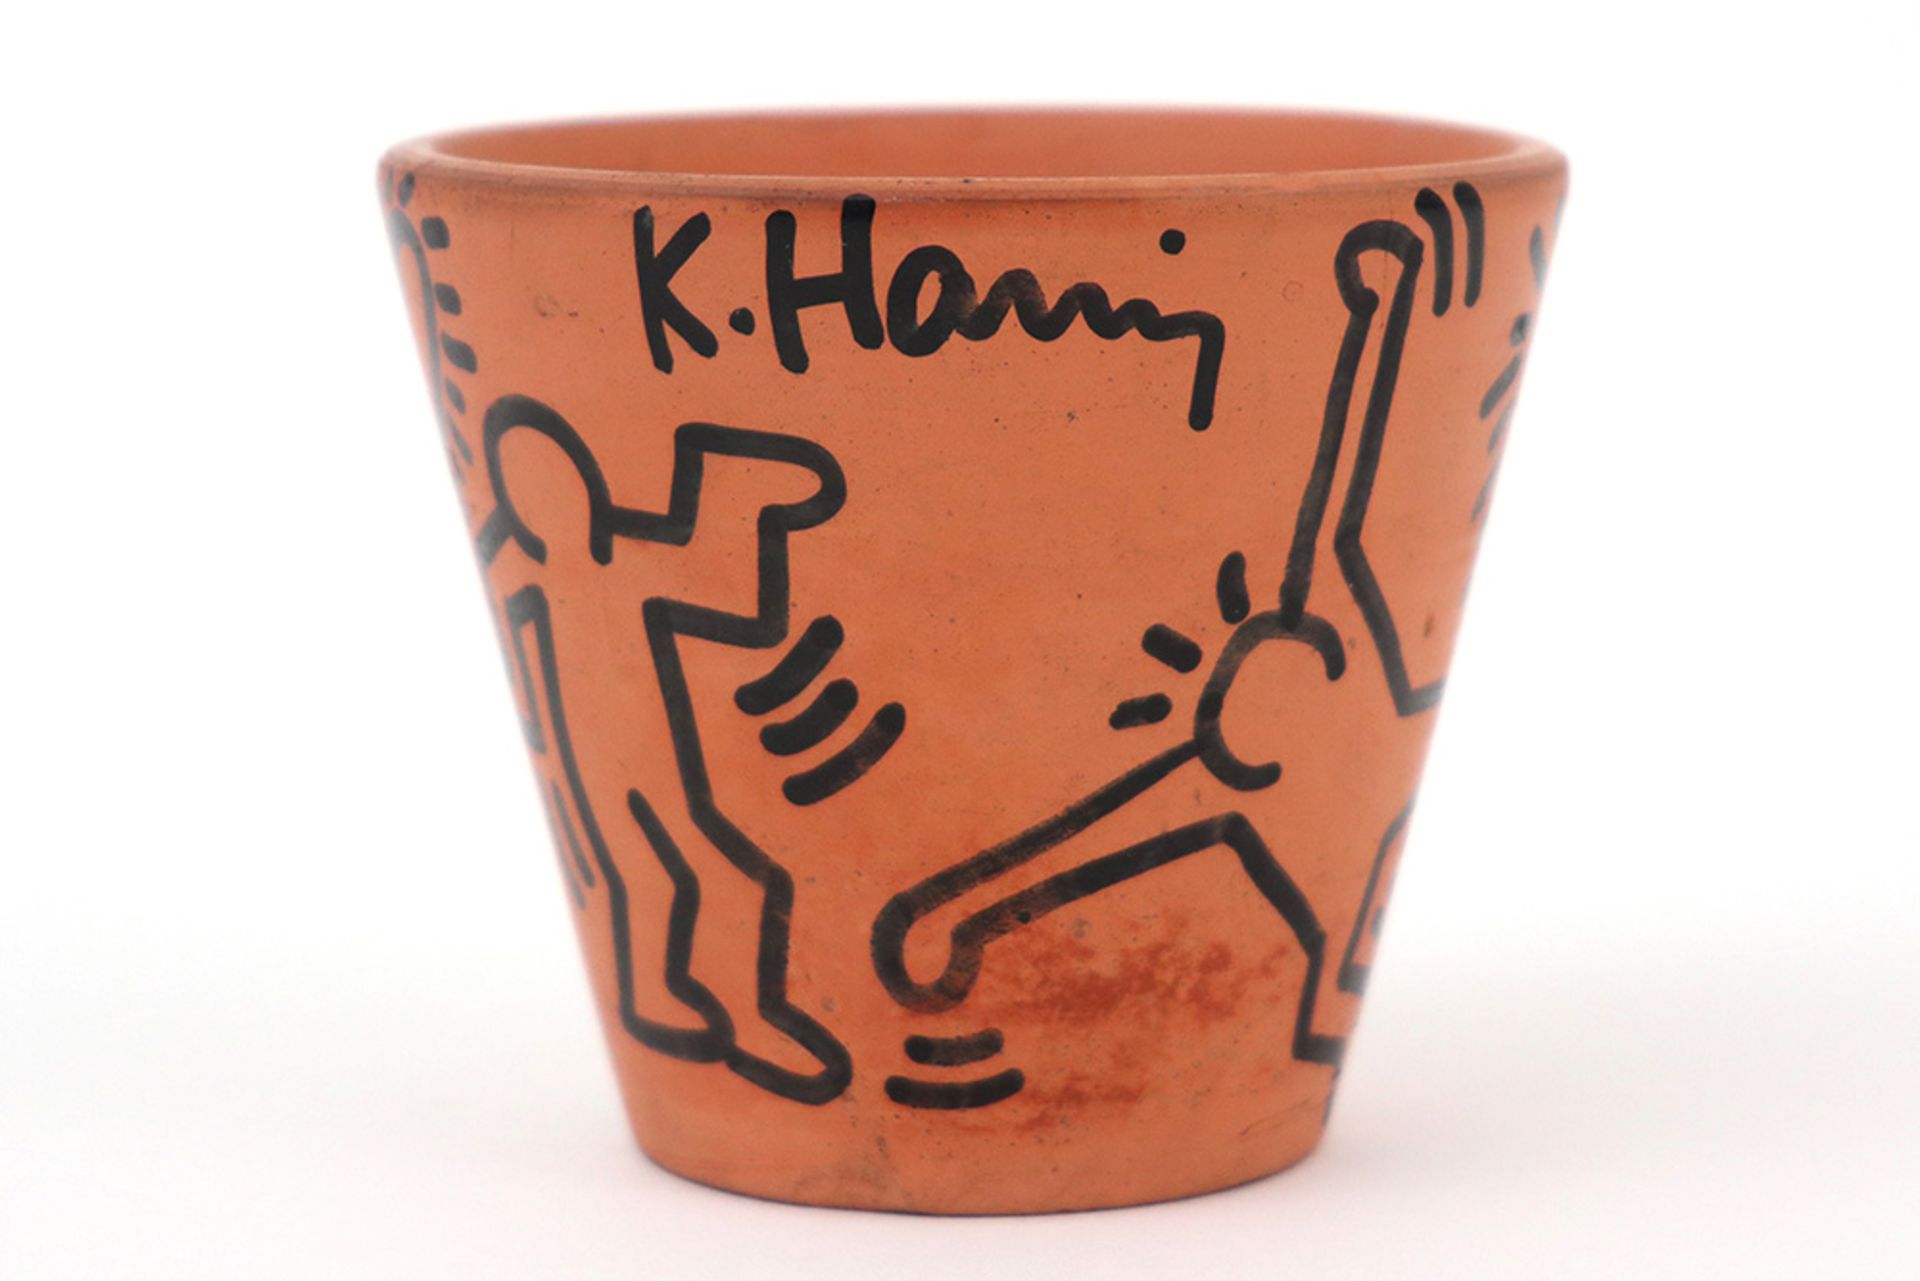 Keith Haring signed drawing in felt-tip pen on ceramic flower pot - dated (19)89 || HARING KEITH ( - Image 2 of 7